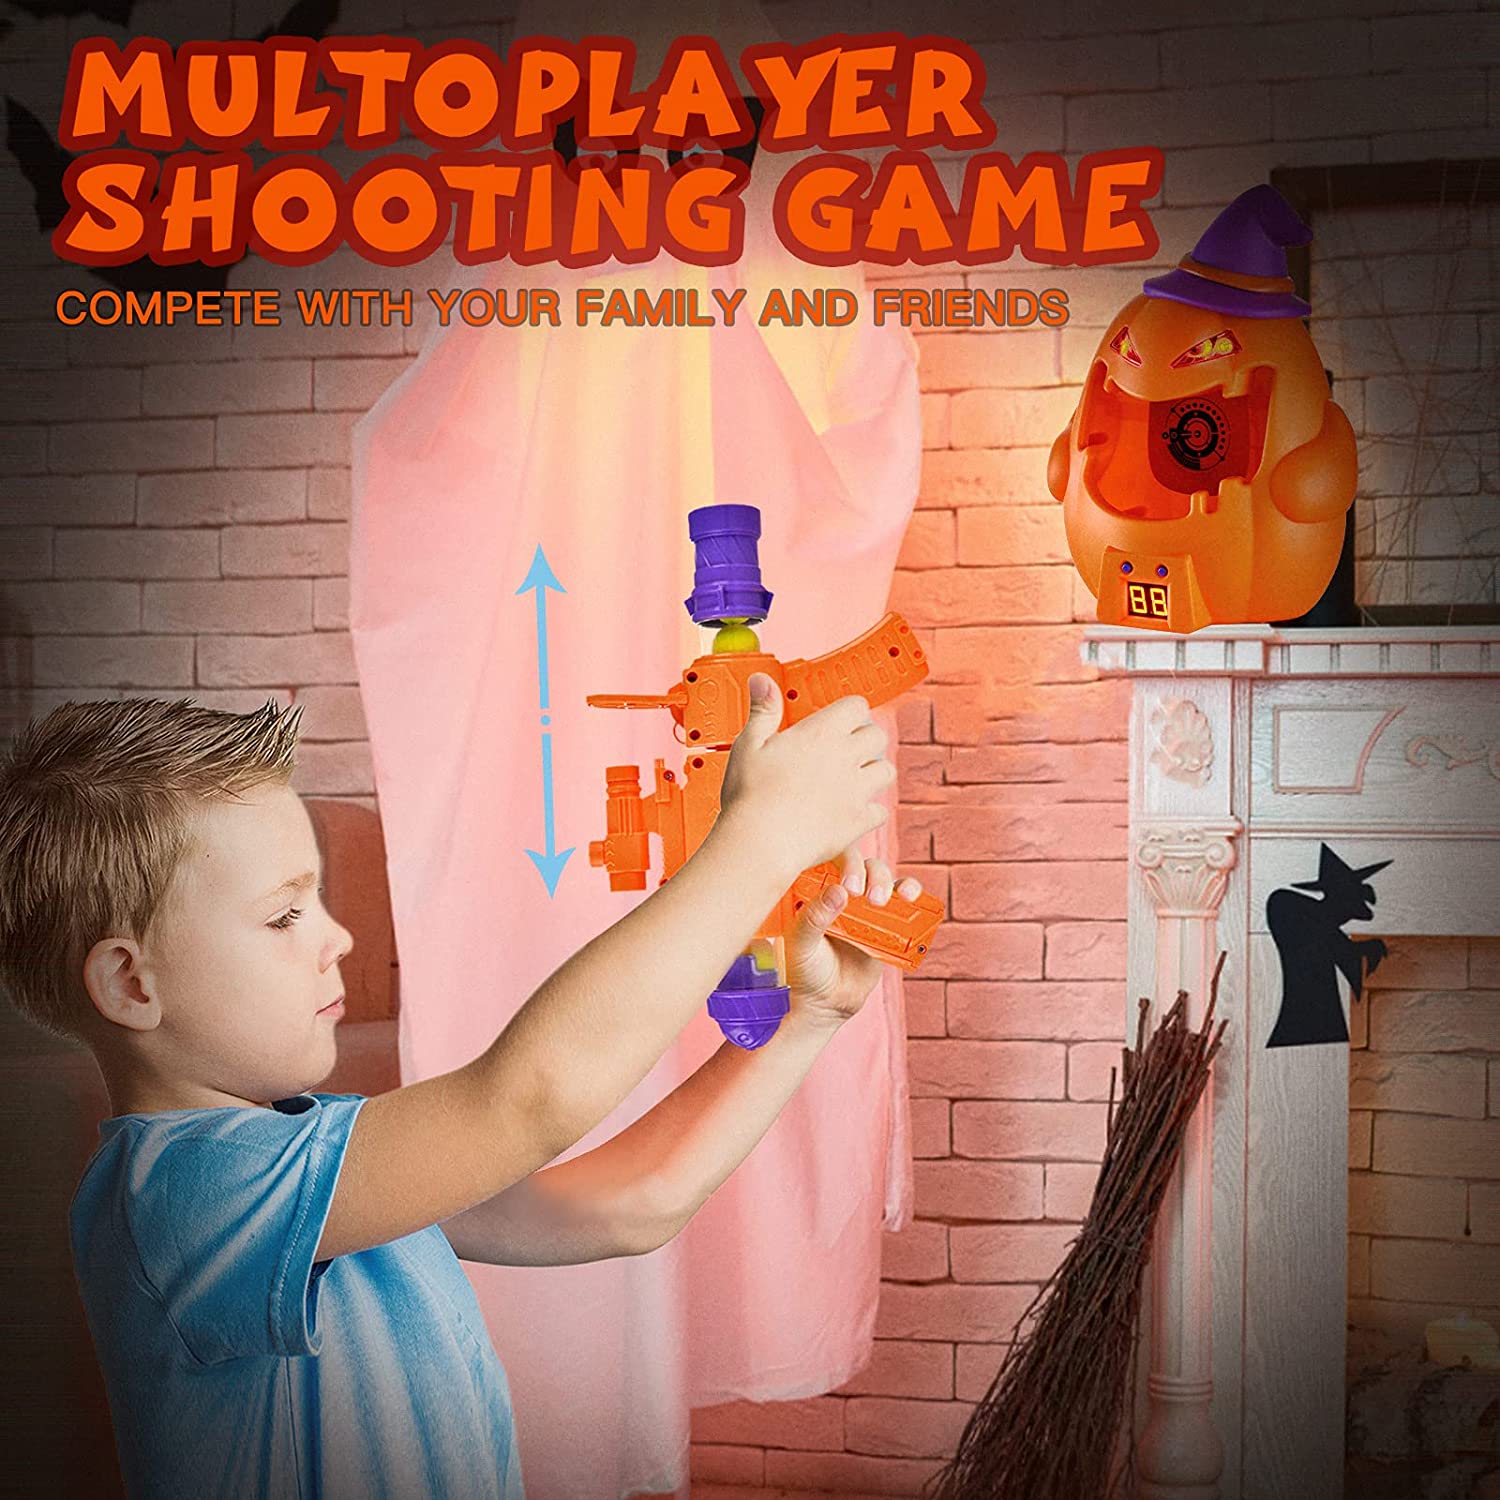 Halloween Shooting Game, Pumpkin Score Glowing Display Reset Button No.3597 (without batteries)